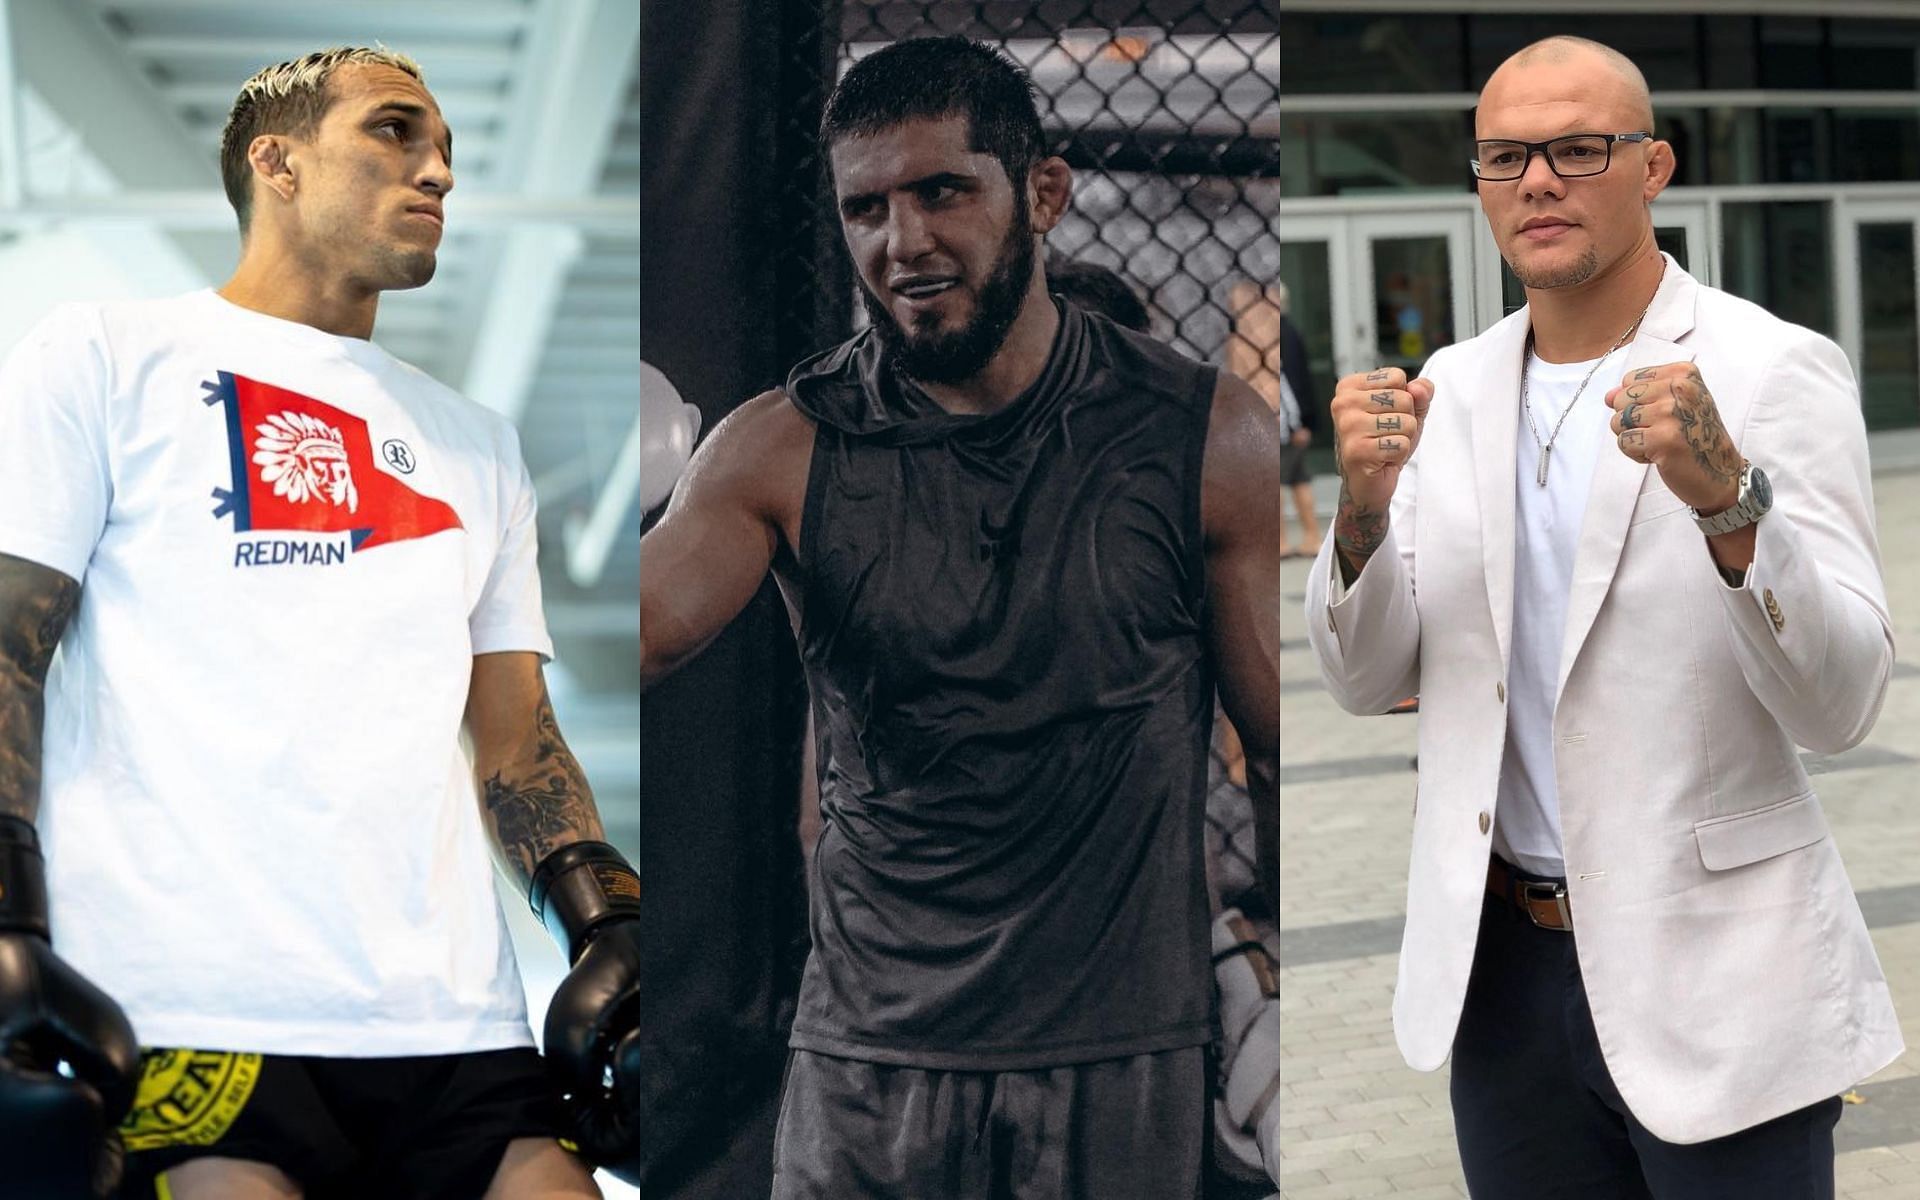 (from left to right) Charles Oliveira, Islam Makhachev, and Anthony Smith (images courtesy of @charlesdobronxs, @islam_makhachev, and @lionheartasmith from Instagram)